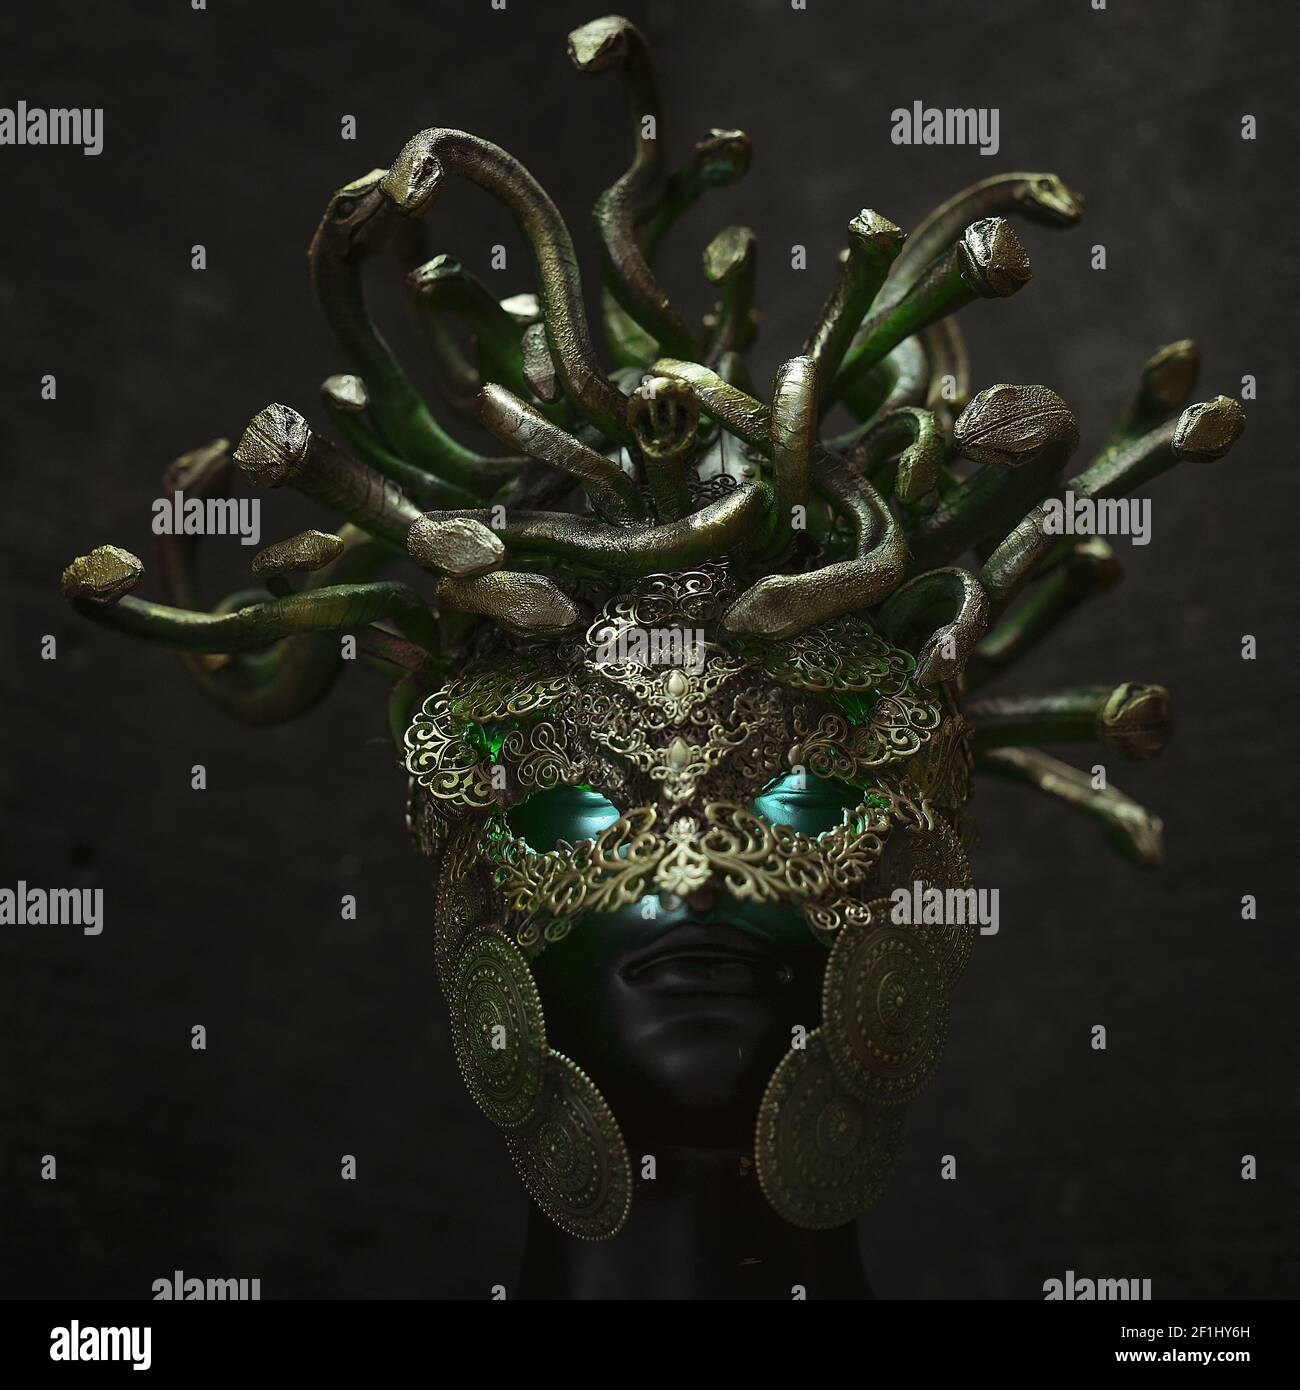 Head Medusa, creature of Greek mythology. pieces made by hand with goldsmiths and metals such as gold and copper. wears a helmet Stock Photo